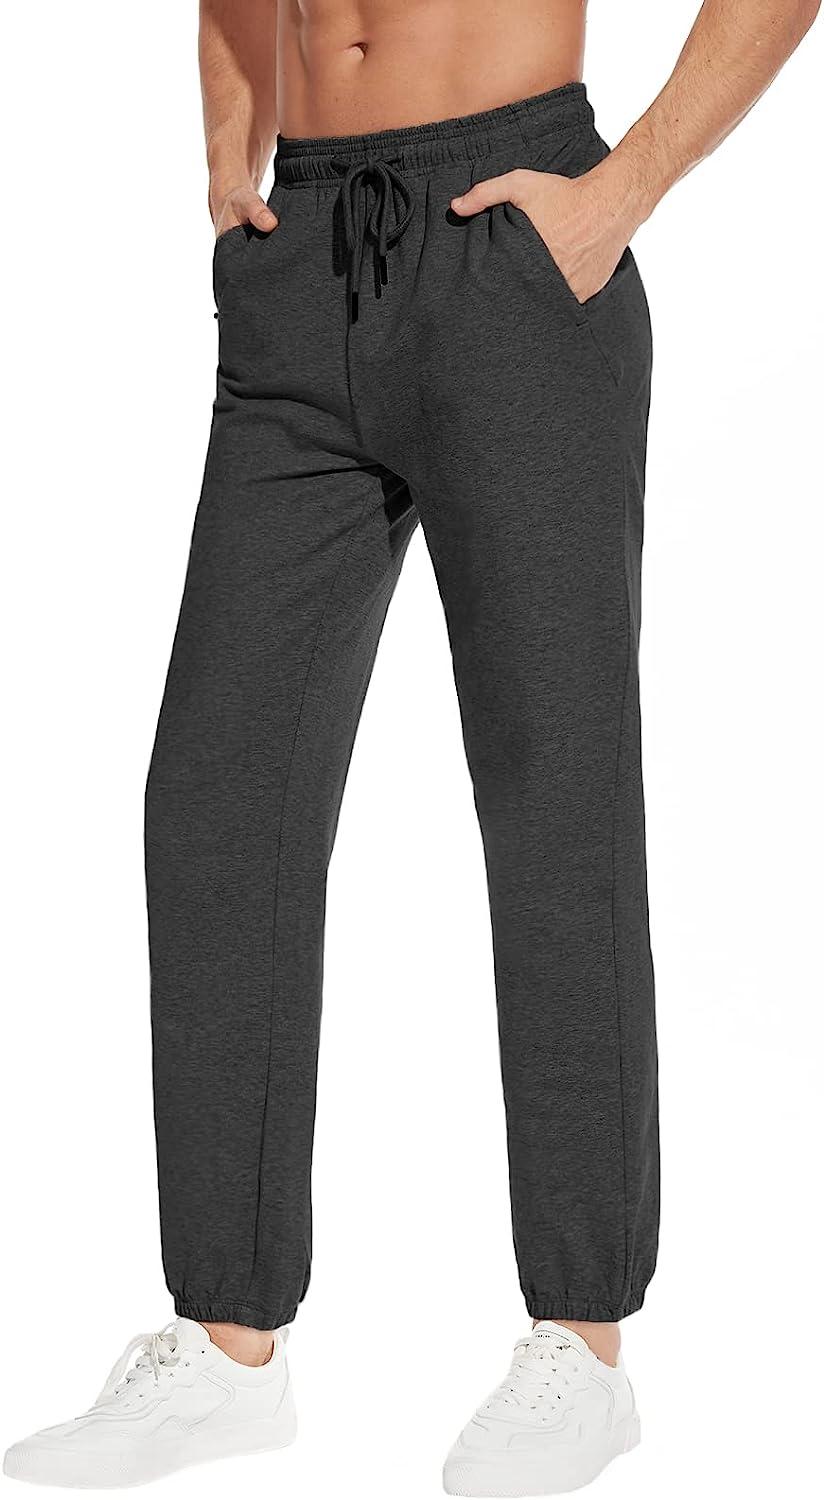 Men's Cotton Joggers Athletic Sweatpants with Pockets - Navy / S